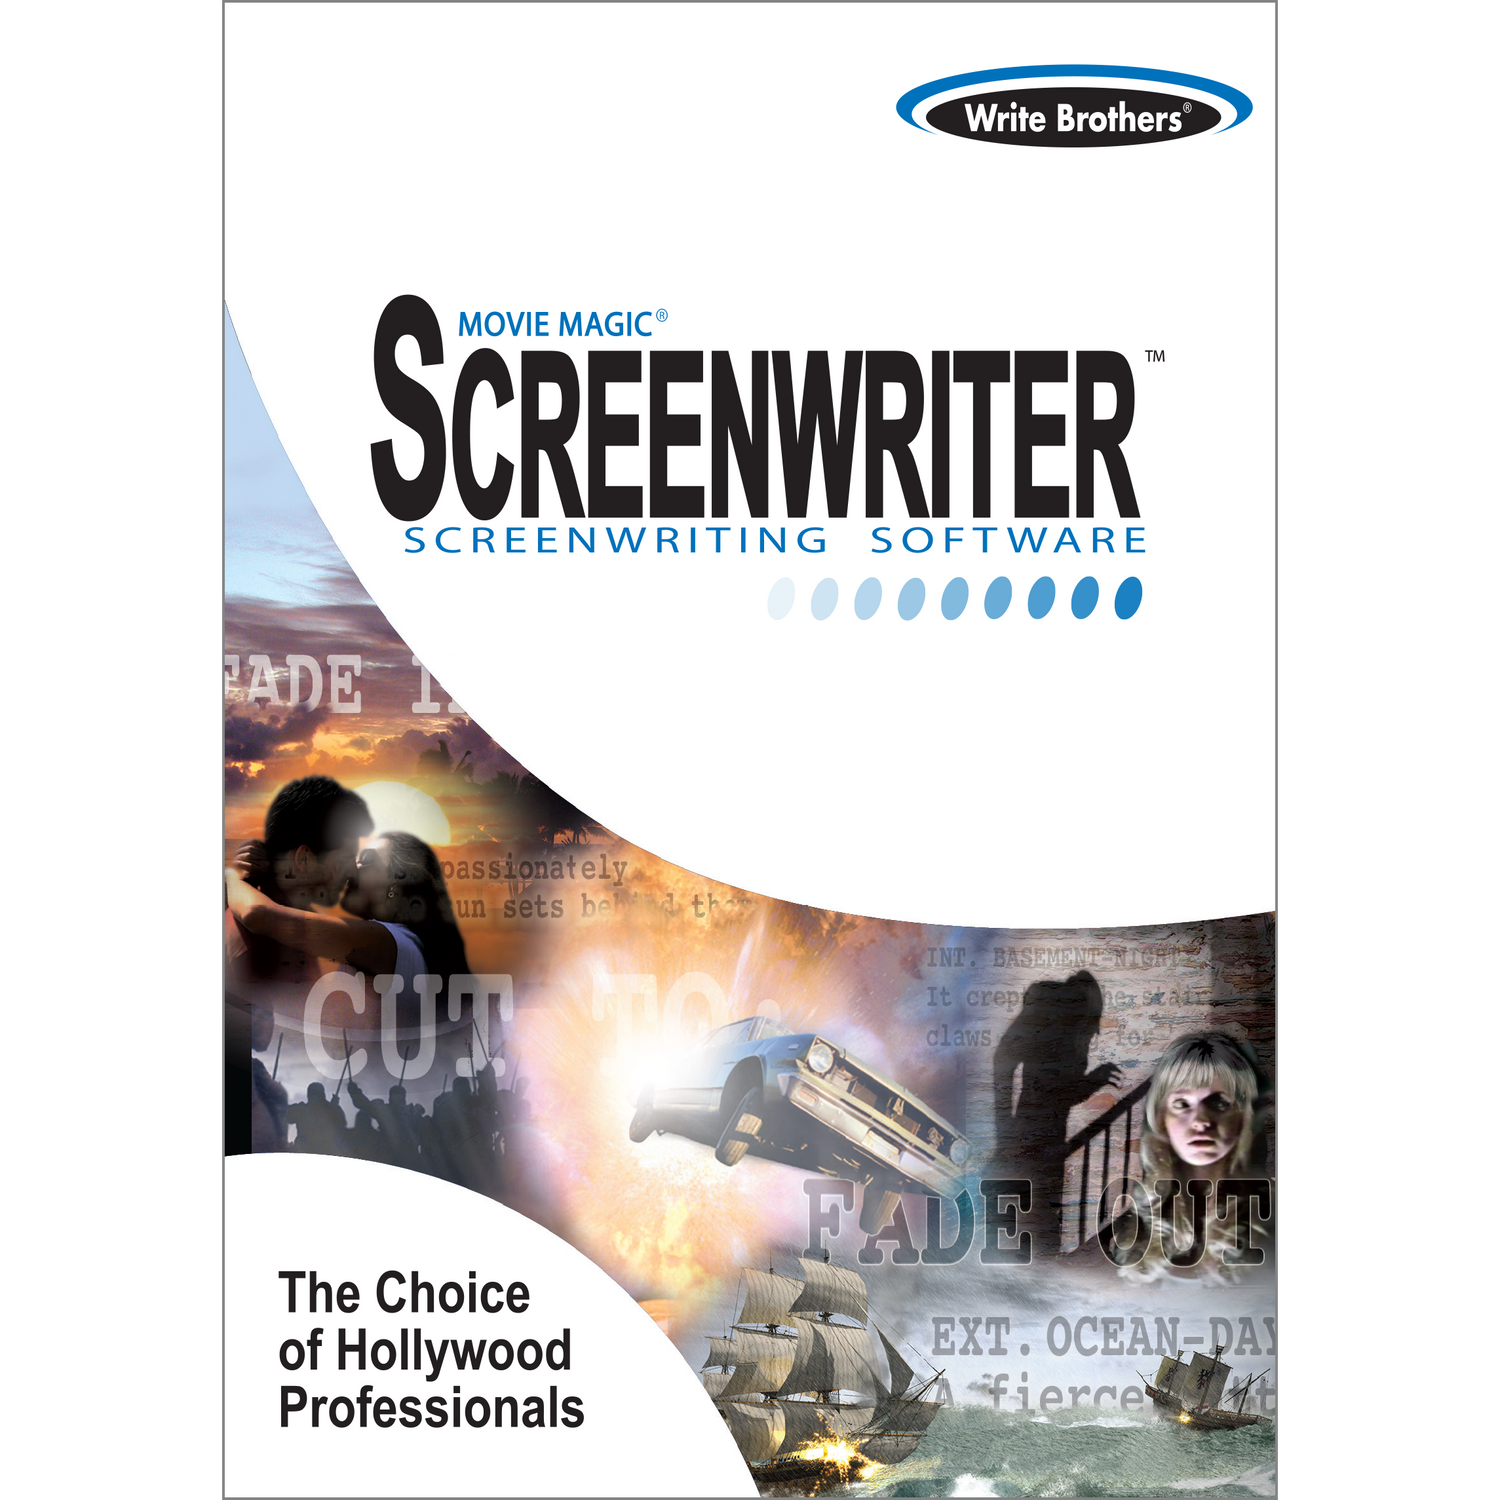 Movie Magic Screenwriter. Software for screenwriting, sitcoms, TV, stage plays, comics, novels, graphic novels, and more.  The choice of Hollywood professionals.